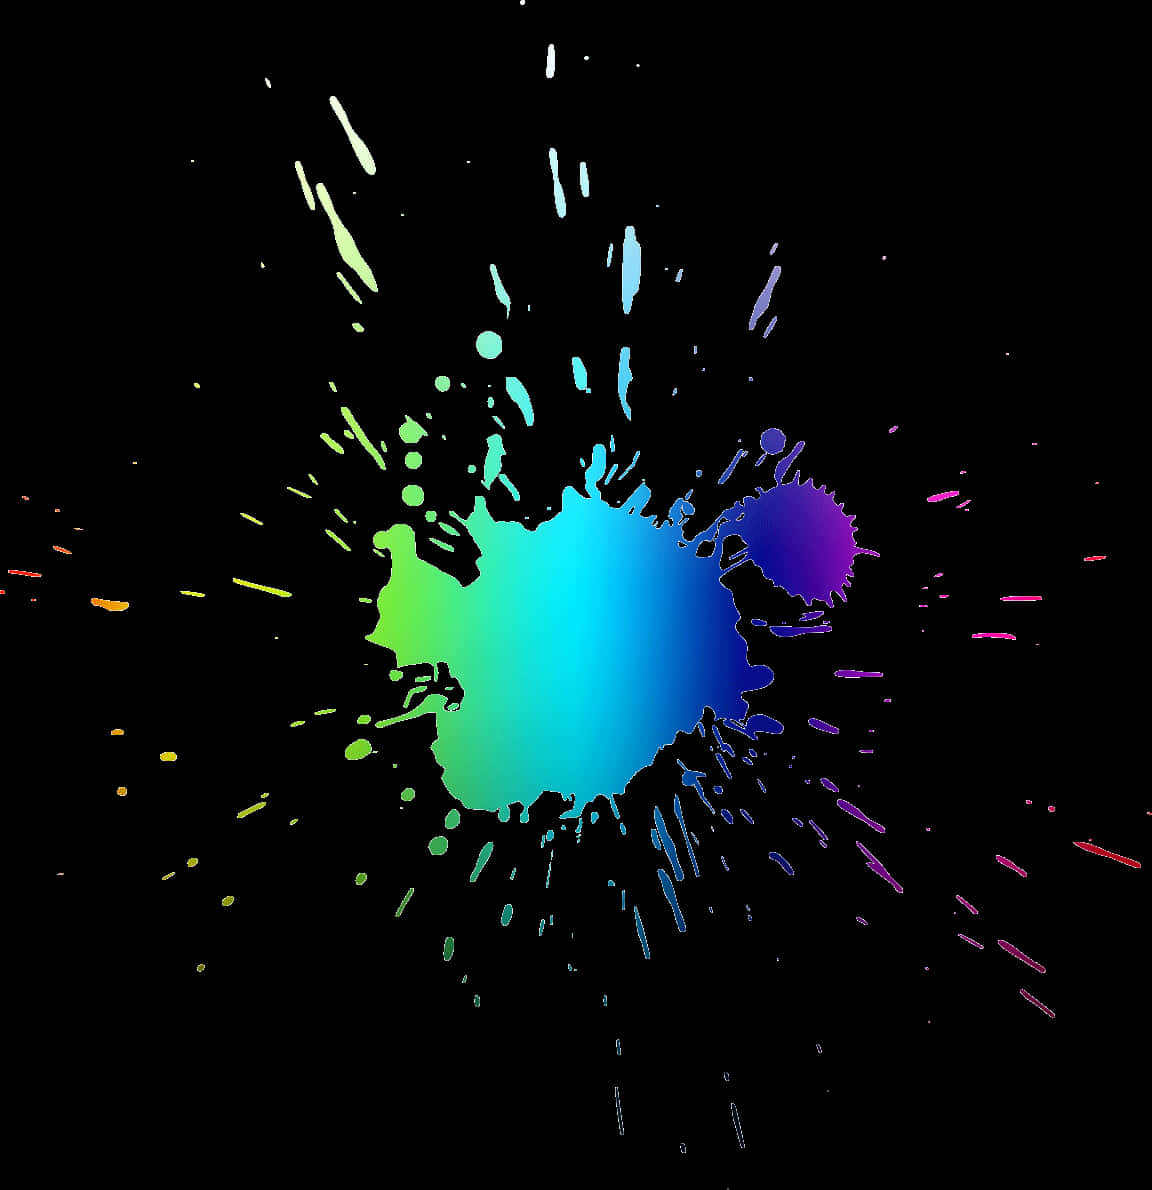 A Rainbow Colored Splatter On A Black Background